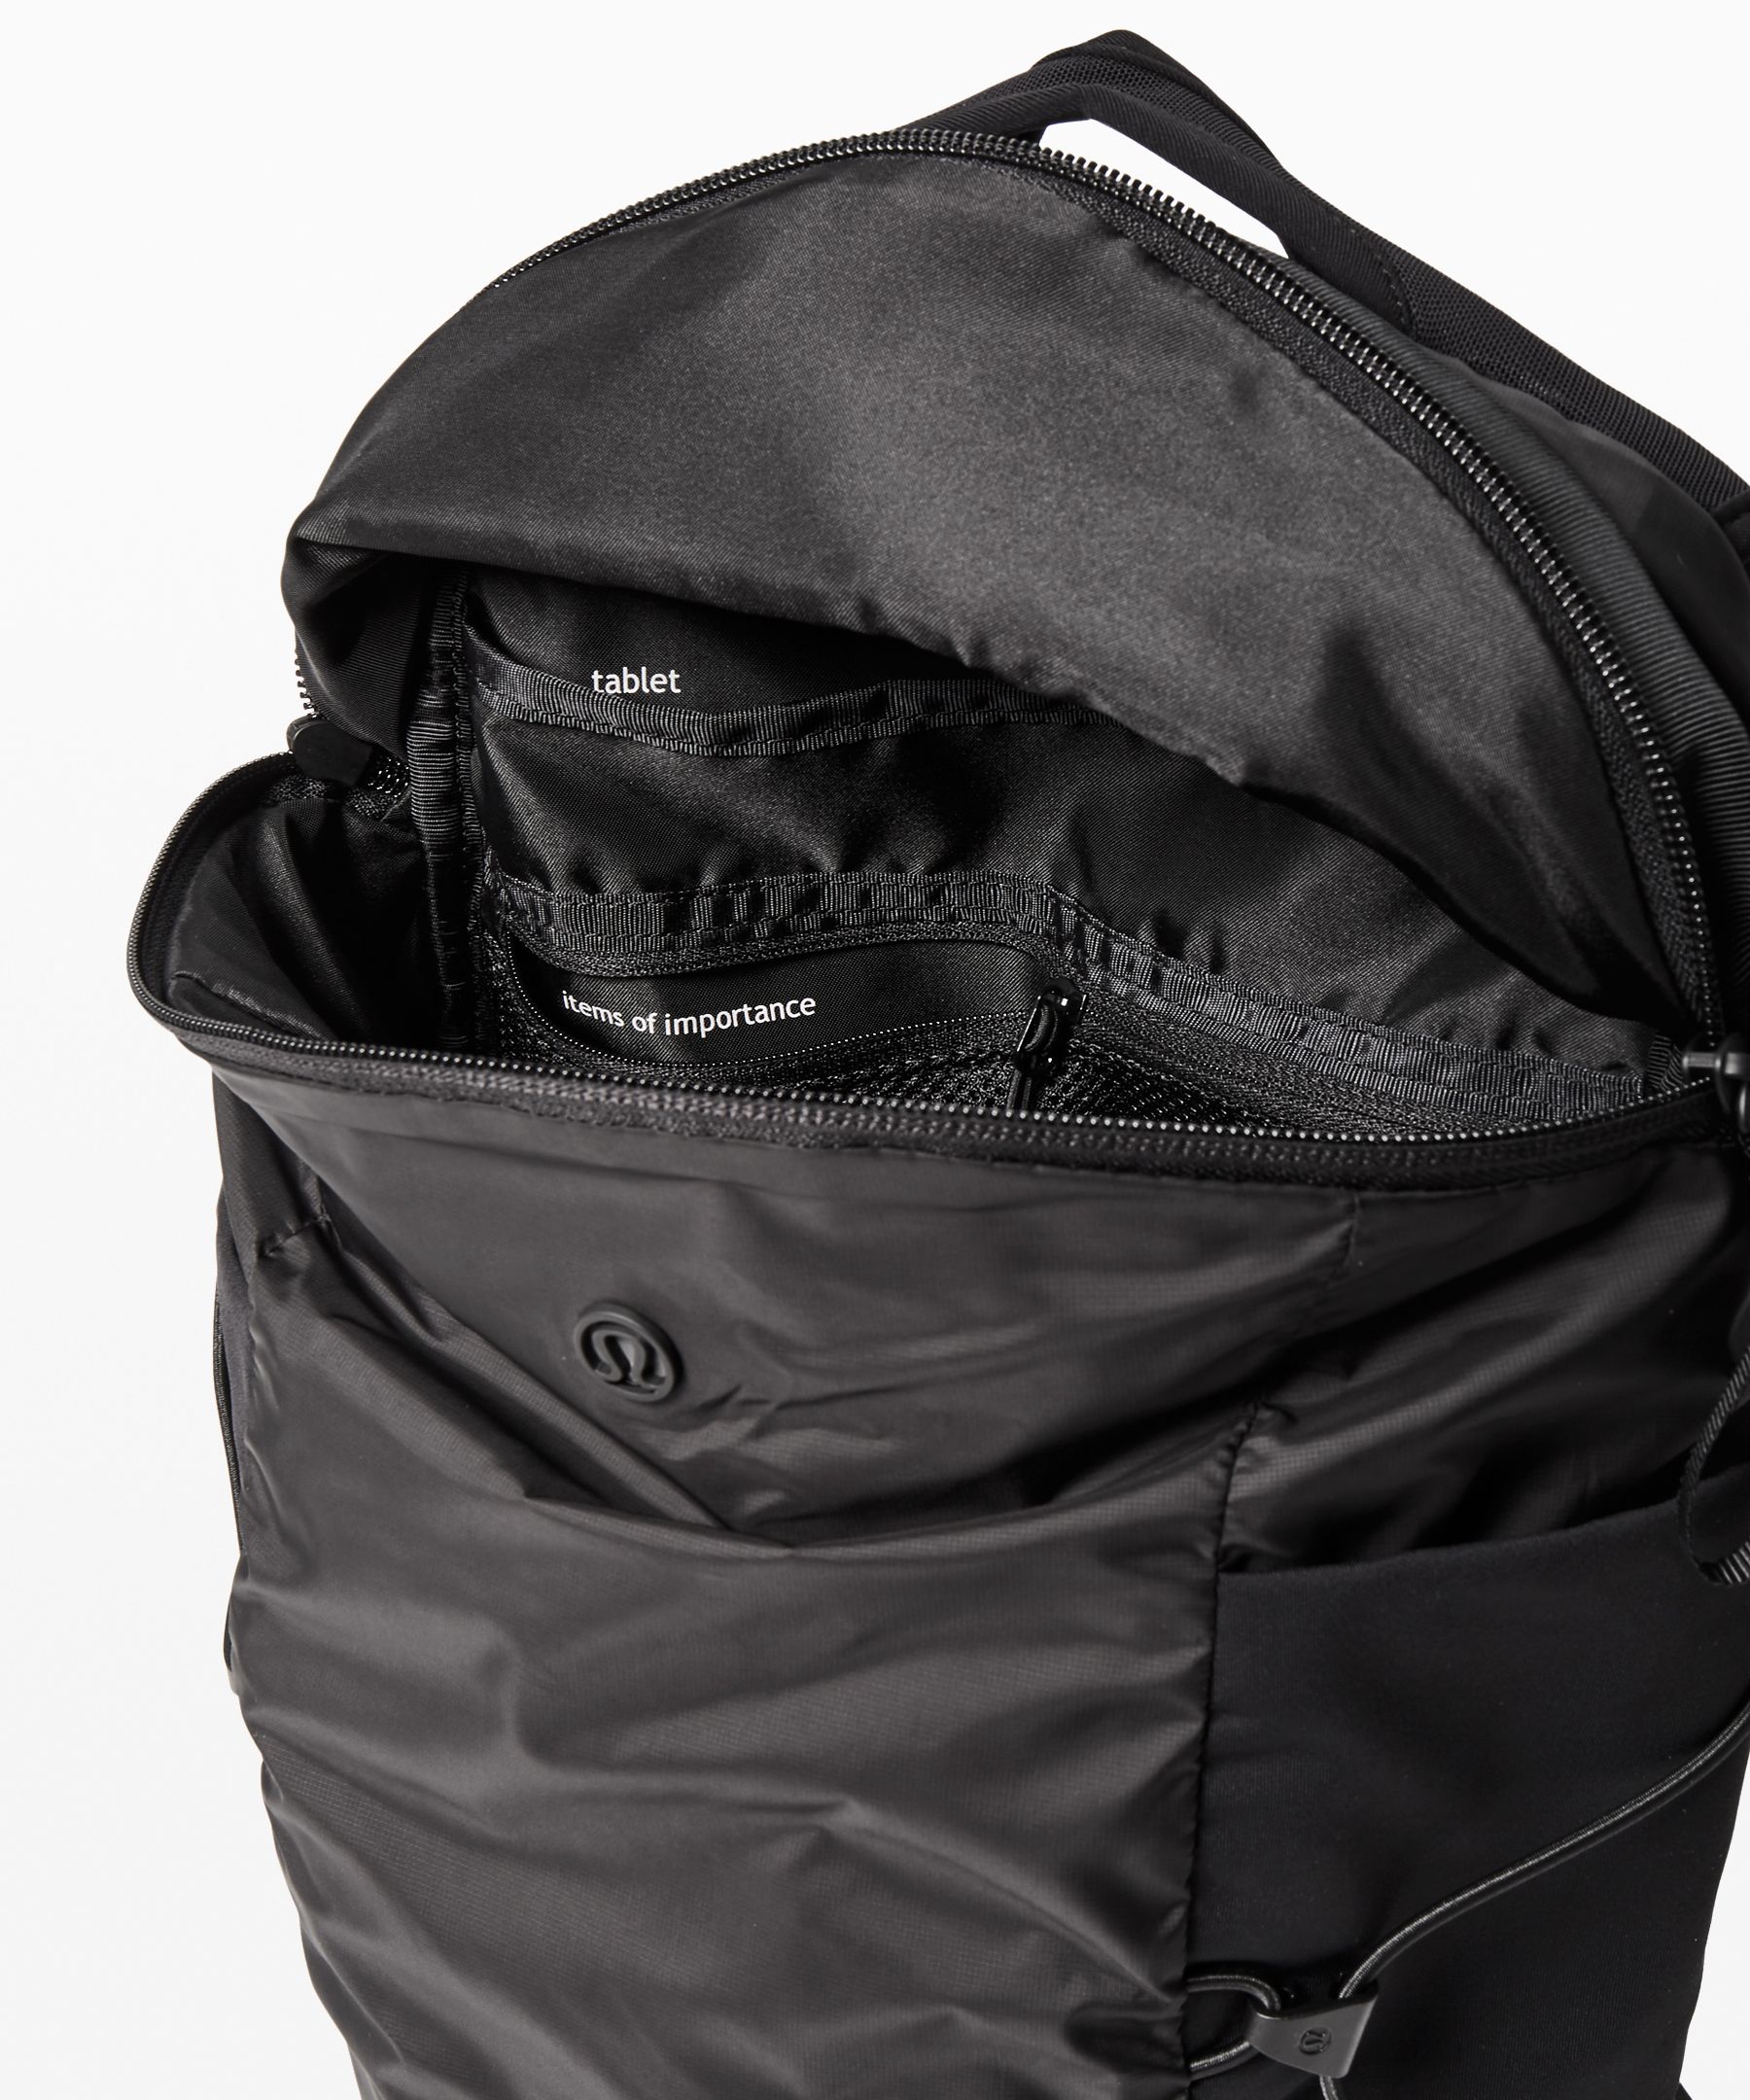 lululemon outlet bags